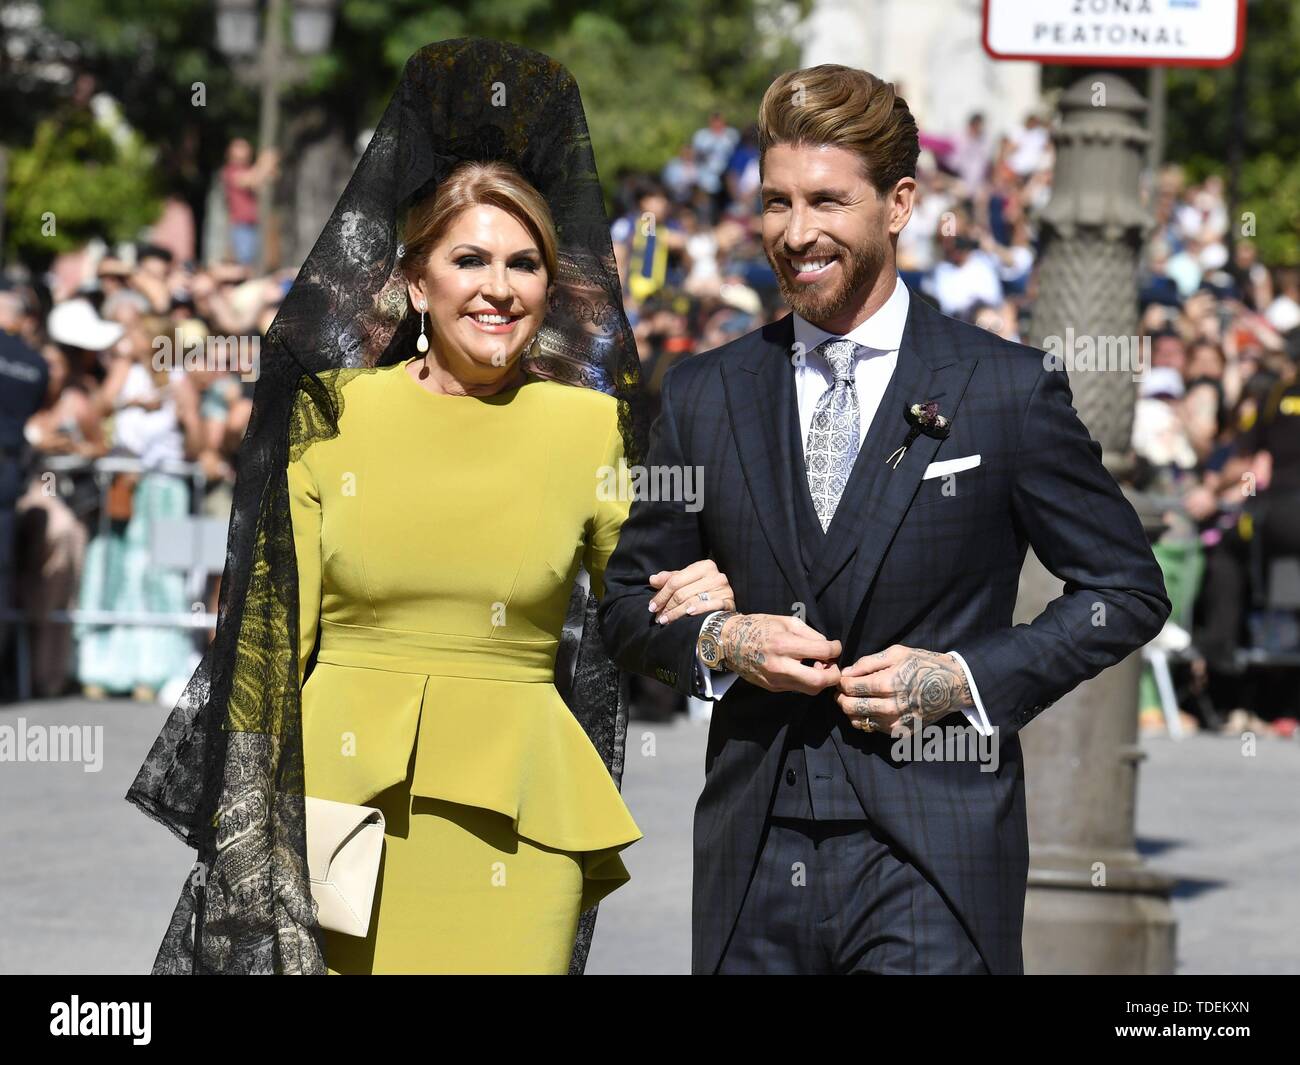 Seville, Spain. 15th June, 2019. Soccerplayer Sergio Ramos and mother Paqui Garcia during his wedding with Pilar Rubio in Seville on Saturday, 15 June 2019.   Cordon Press Credit: CORDON PRESS/Alamy Live News Stock Photo